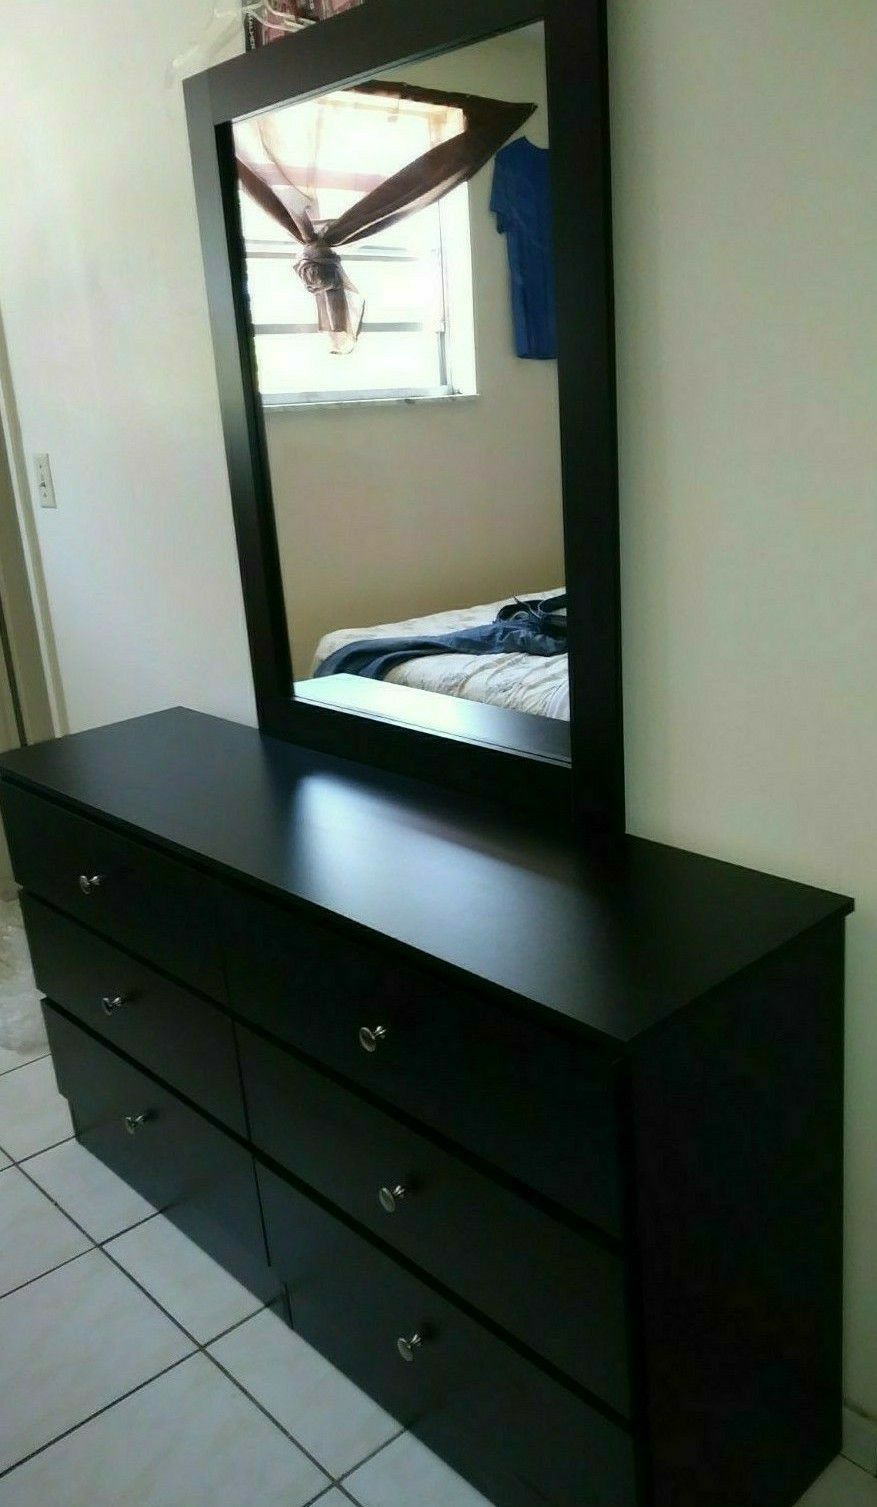 GREAT SALE NEW BEAUTIFUL DRESSER WITH MIRROR